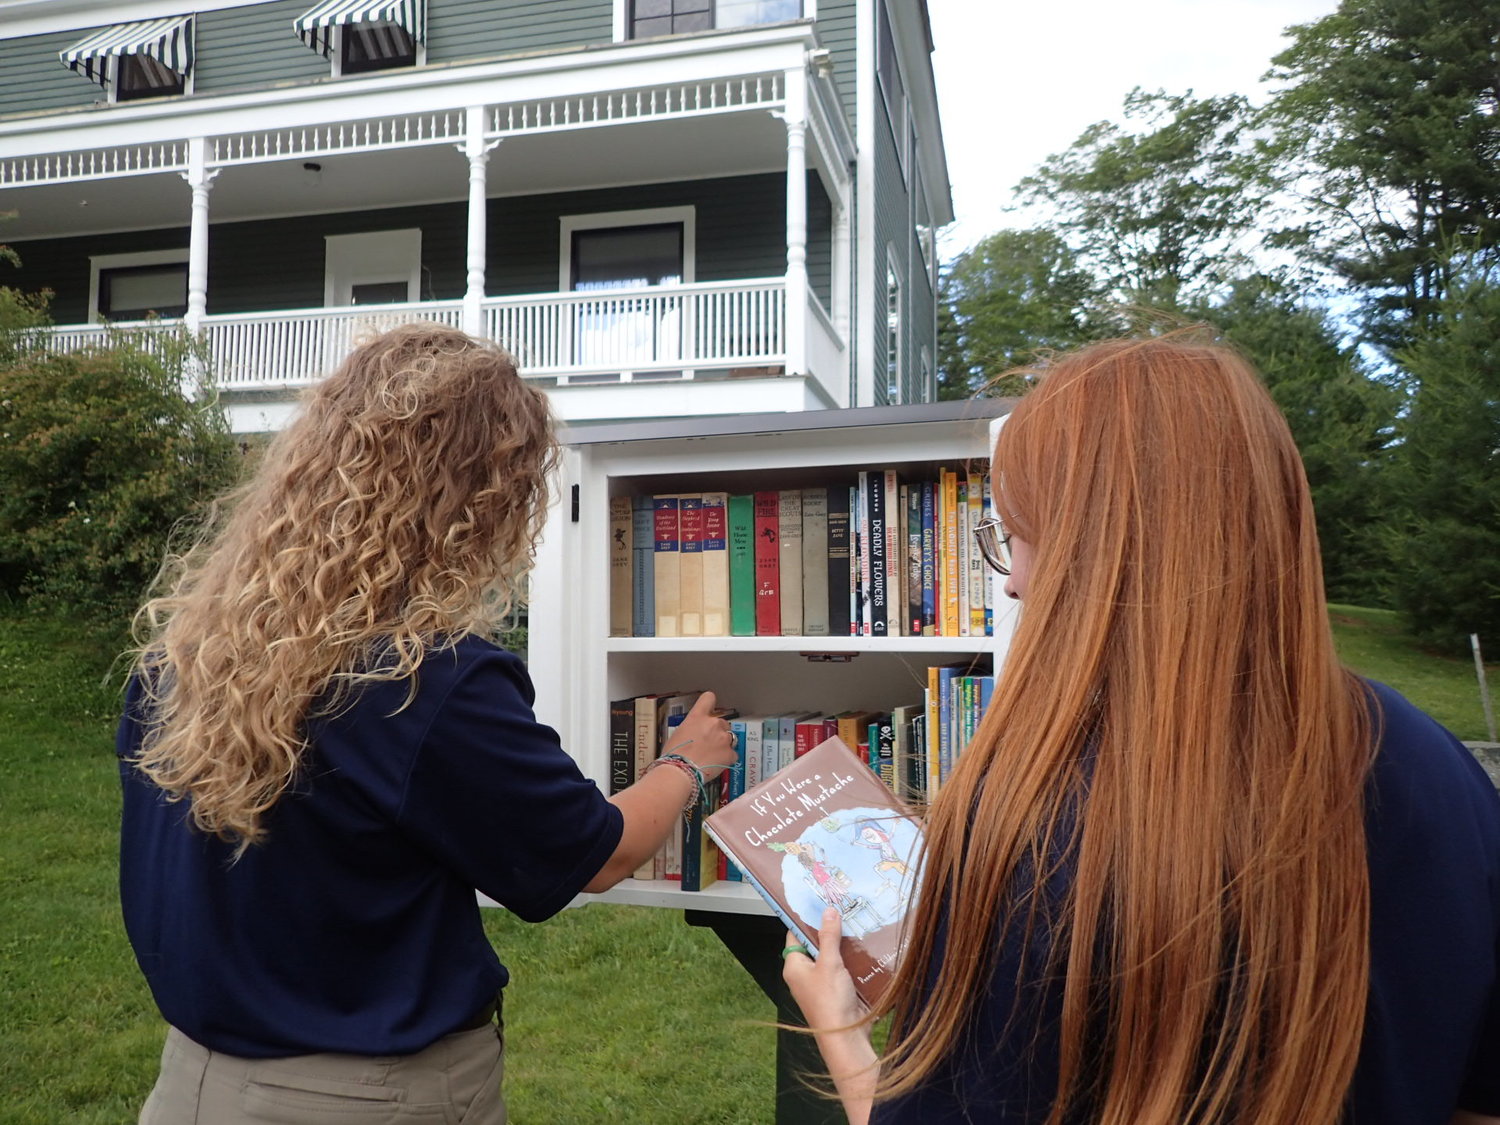 The Upper Delaware’s Little Free Library is located at the home of famed western novelist Zane Grey, and is stocked with several of Grey's books.